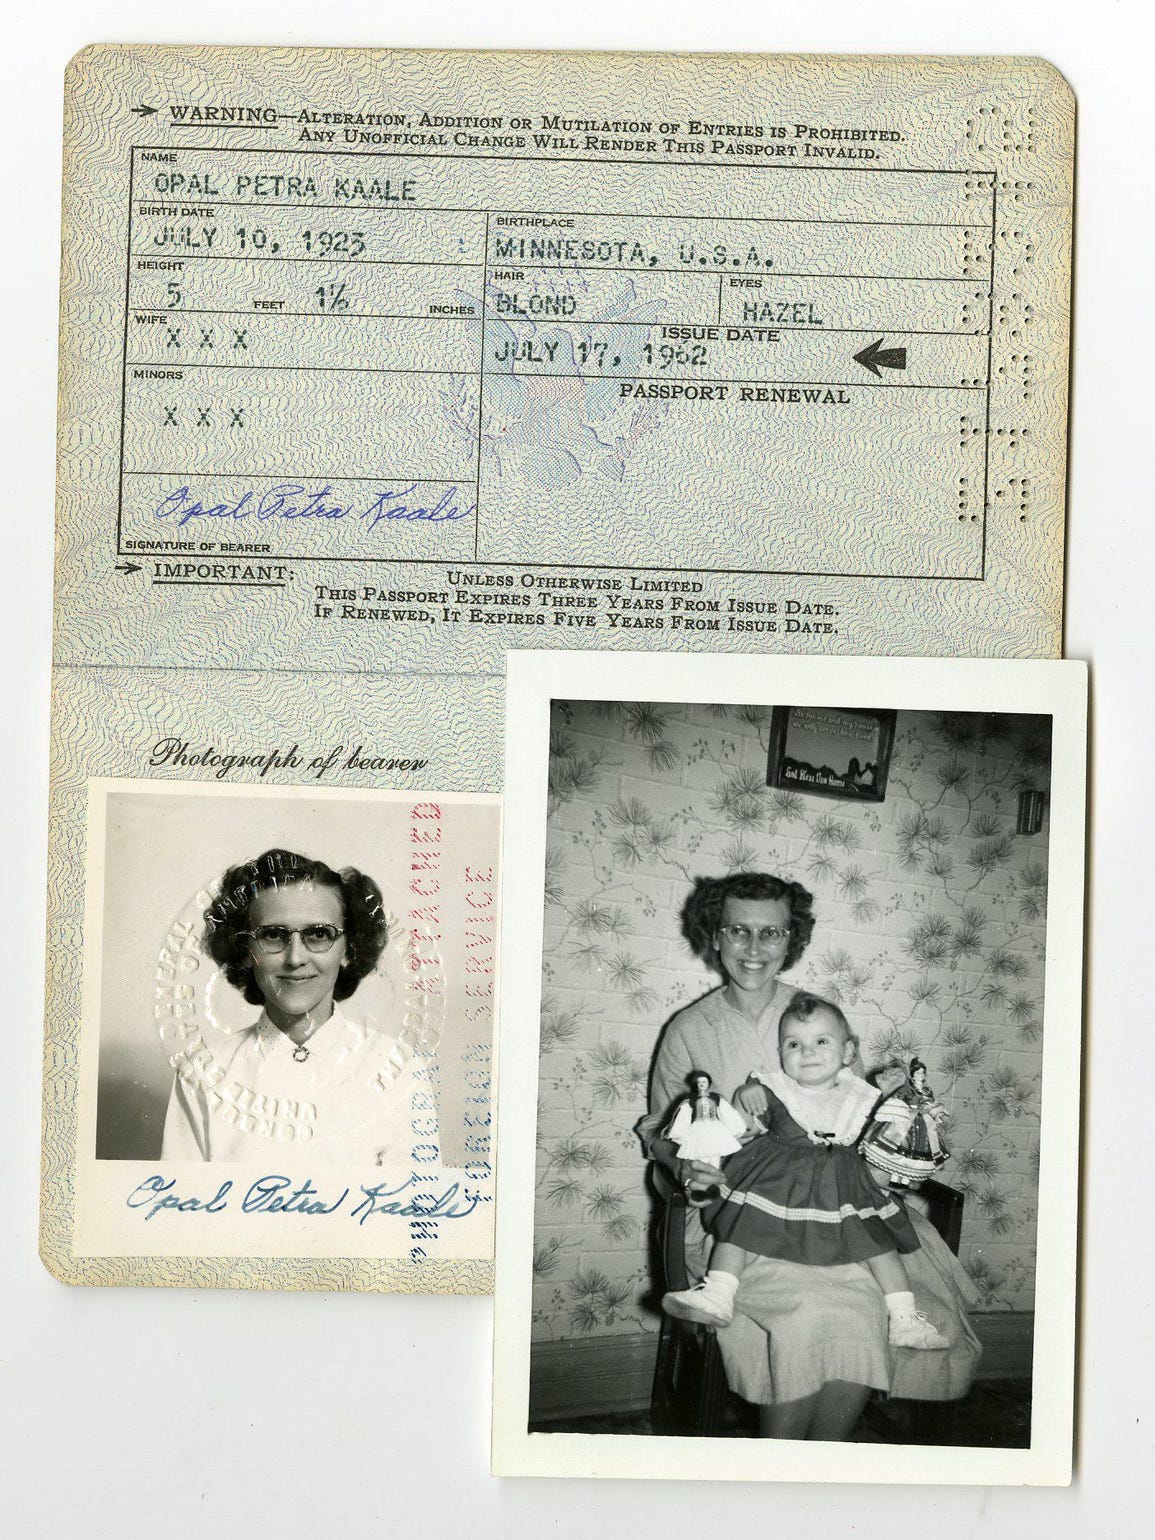 The passport of Kim Kruse’s adoptive mother, Opal Kaale,